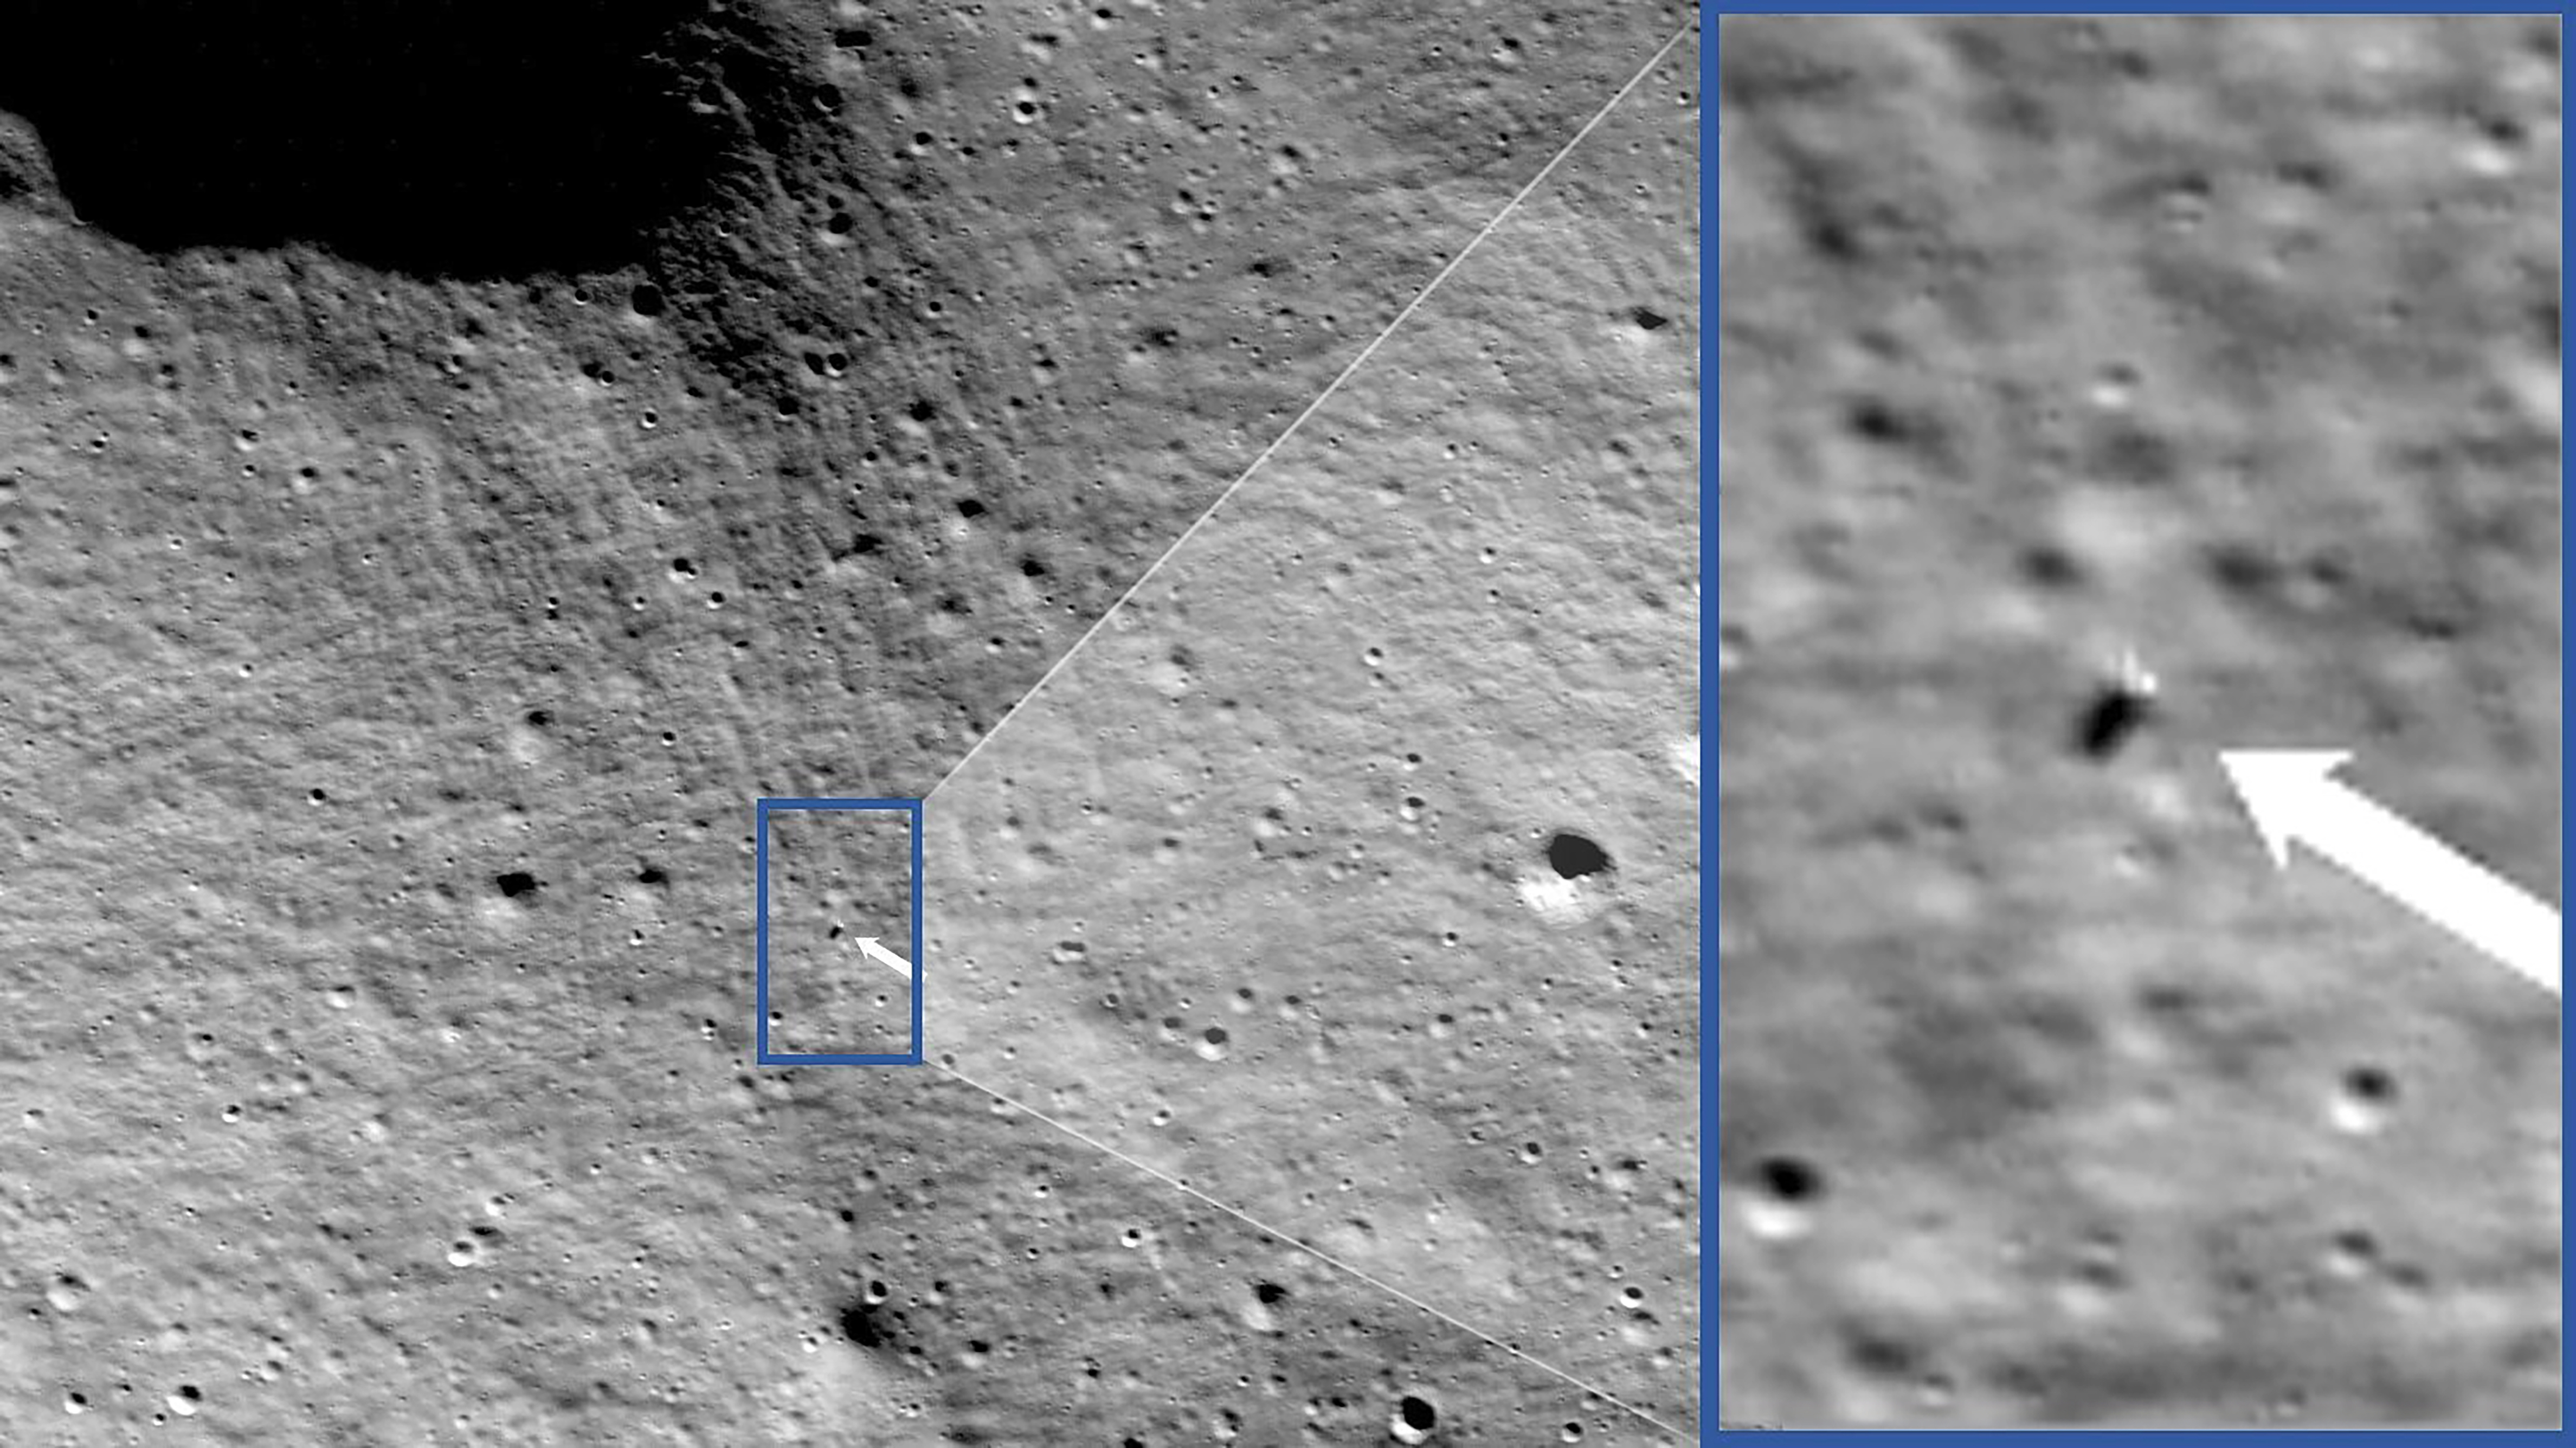 A wide satellite photo of the surface of the Moon showing with an arrow the location of a lunar lander